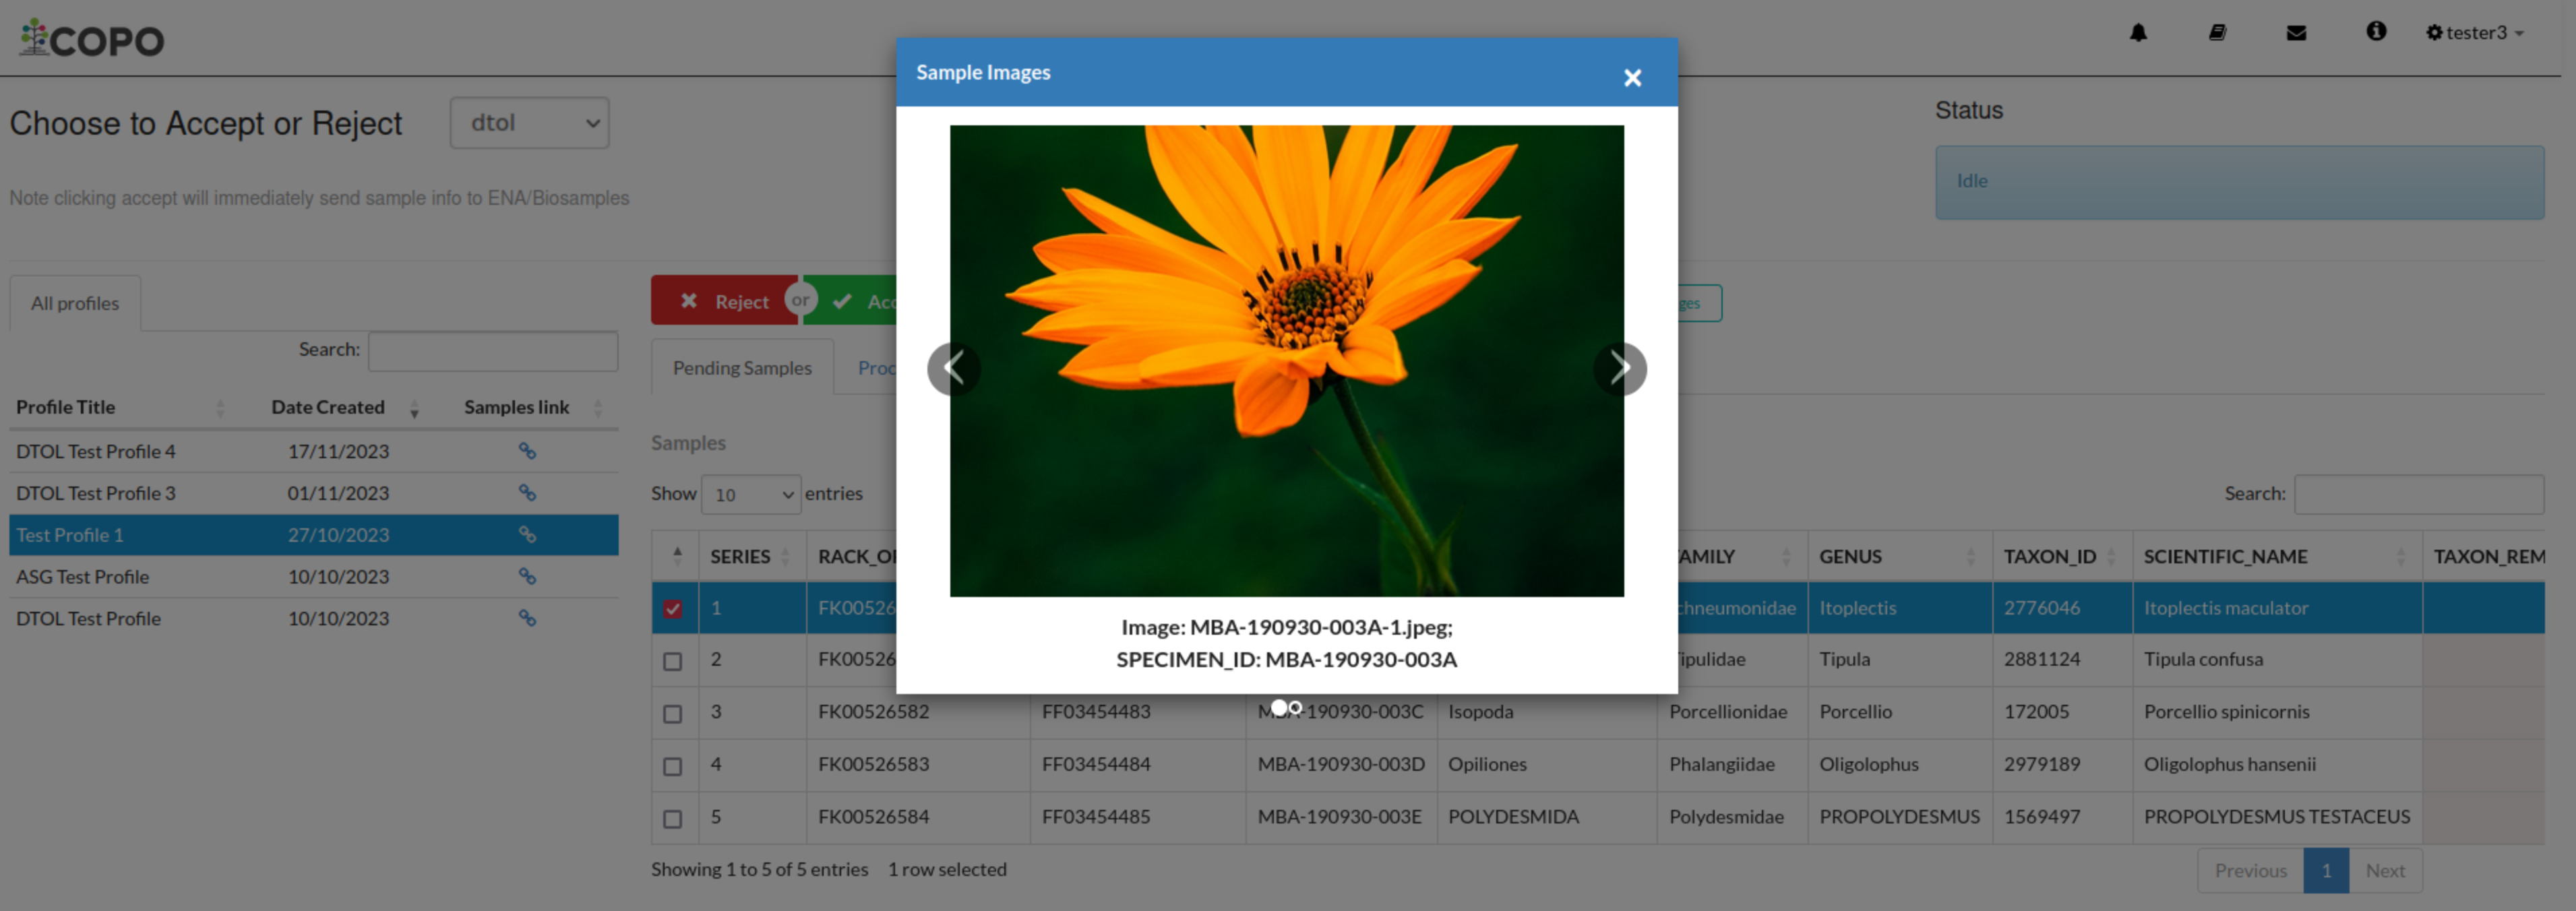 View images popup dialogue with images displayed for selected sample record(s)